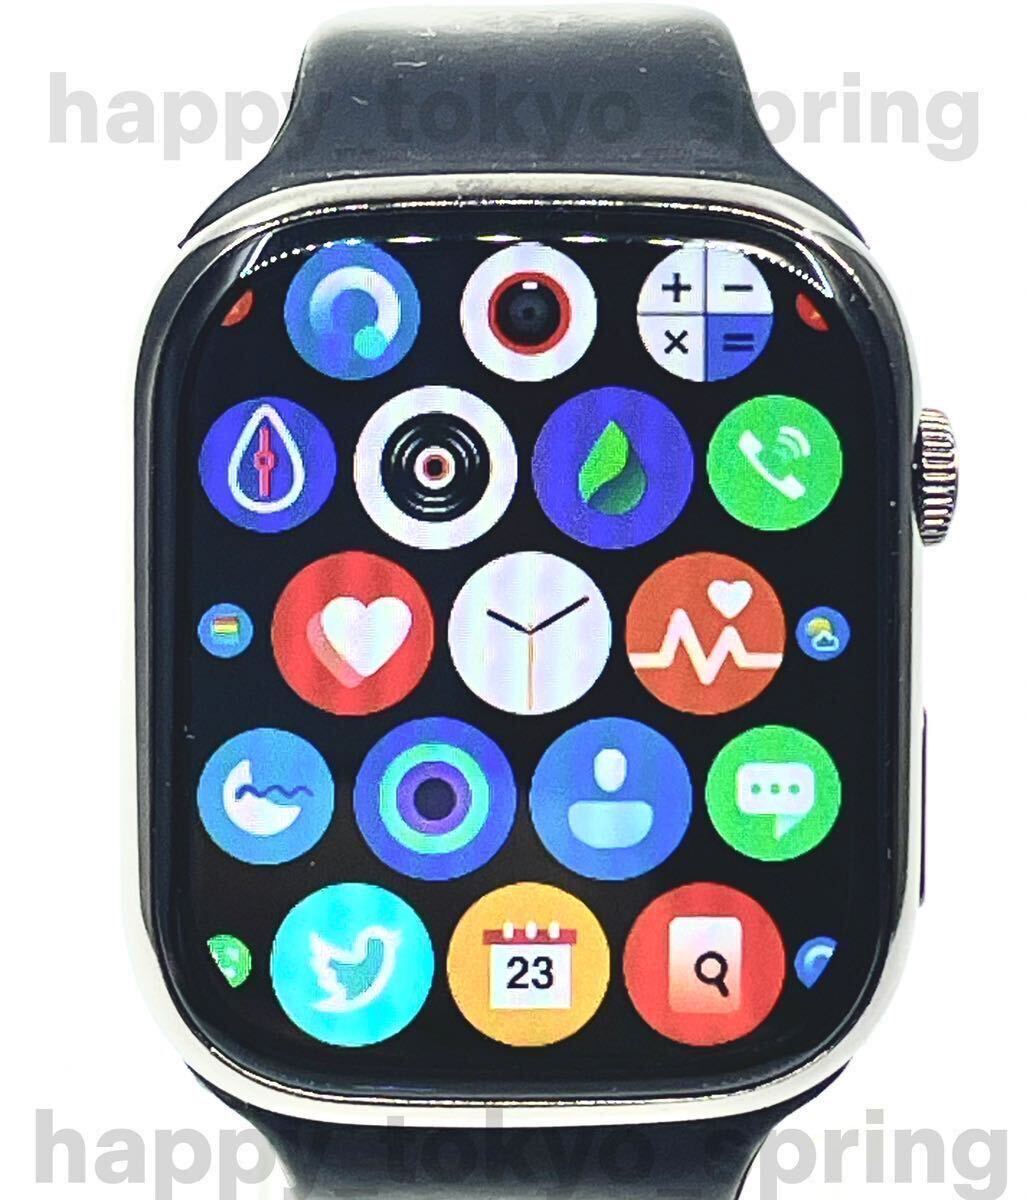  new goods Apple Watch substitute 2.3 -inch large screen smart watch music multifunction Watch9 health sport waterproof . middle oxygen android blood pressure iphone sleeping.